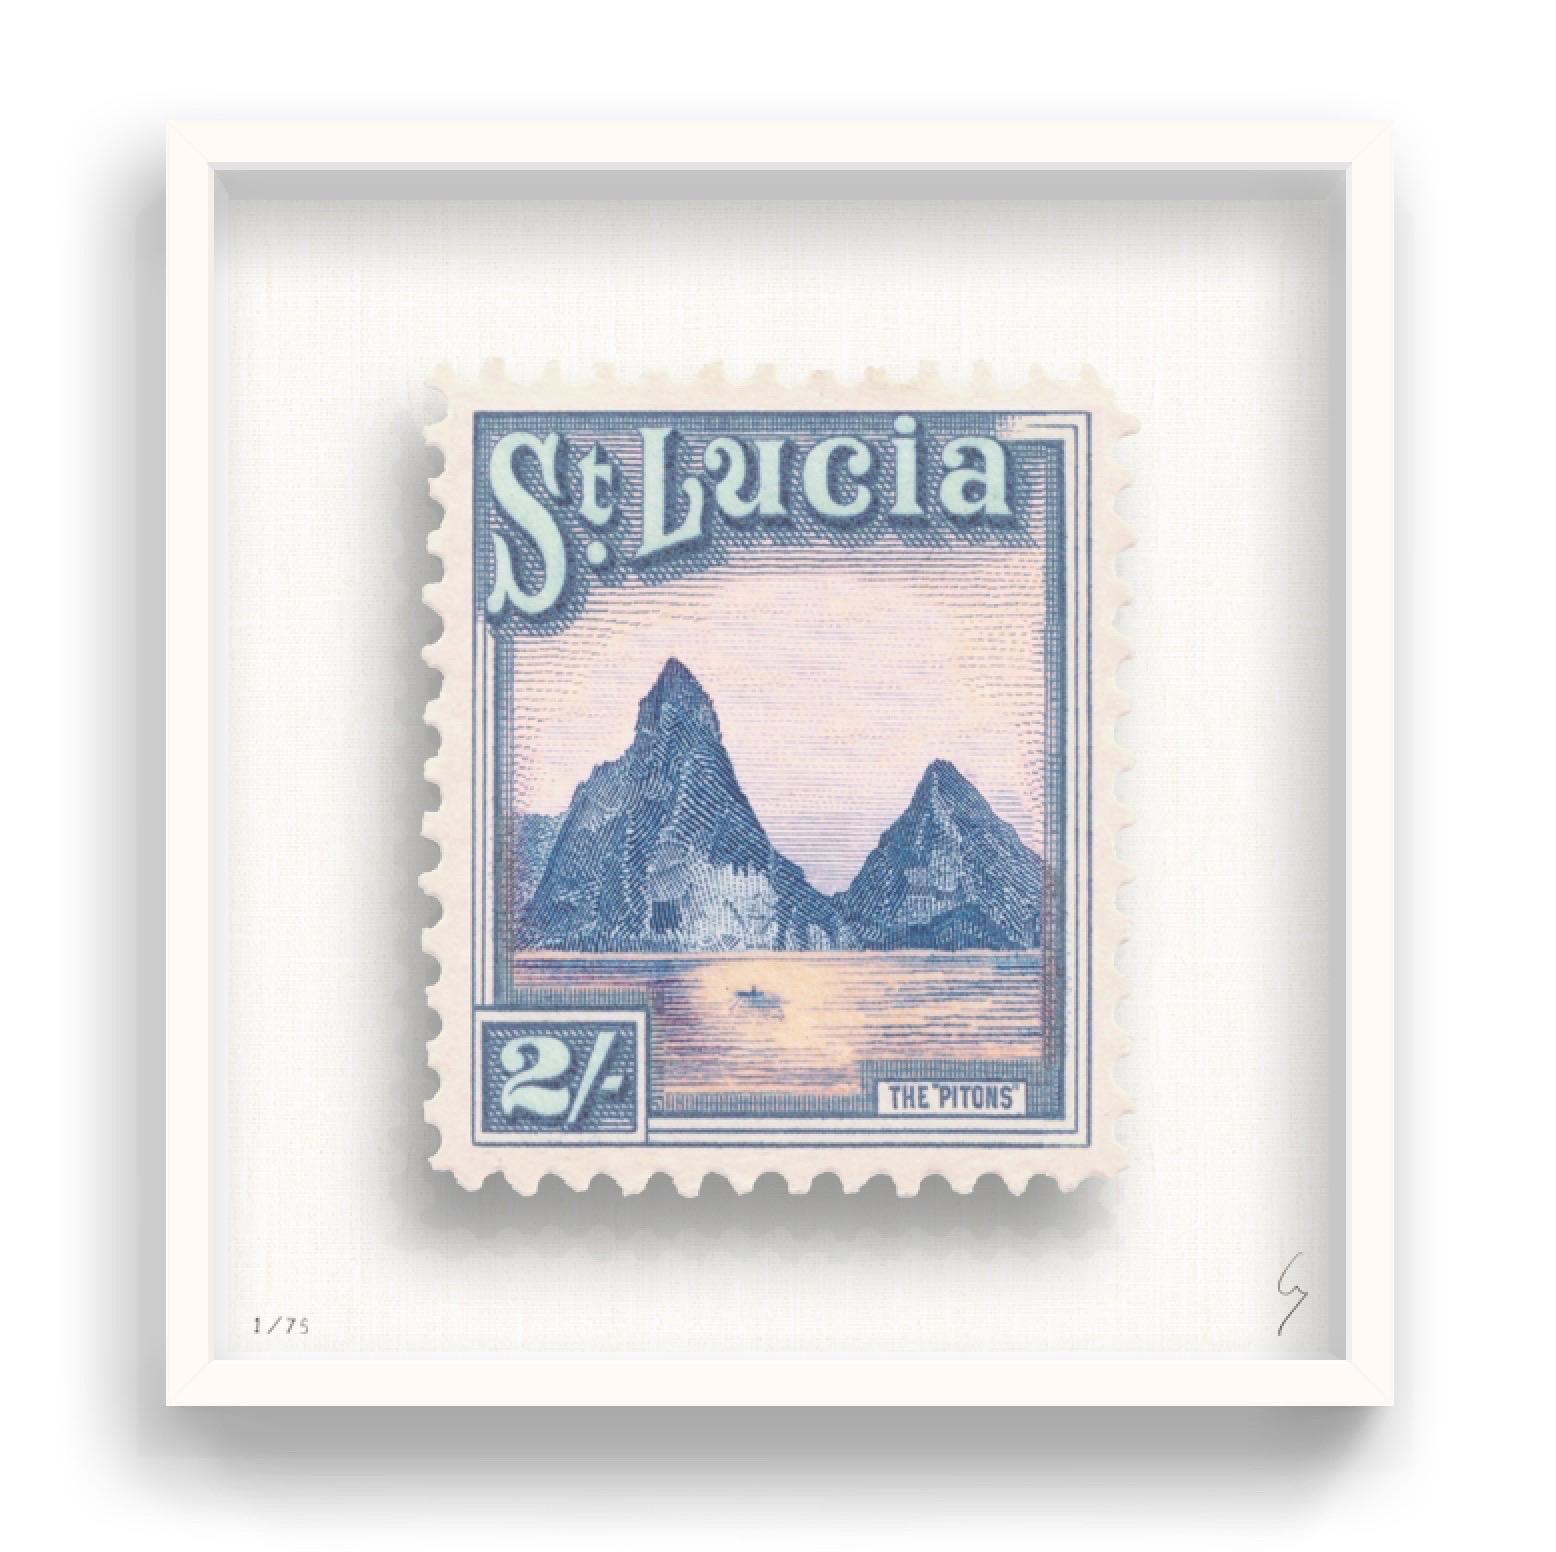 Guy Gee, St Lucia (medium)

Hand-engraved print on 350gsm on G.F Smith card
31 x 35 cm (12 1/5 x 13 4/5)
Frame included 
Edition of 75 

Each artwork by Guy had been digitally reimagined from an original postage stamp. Cut out and finished by hand,